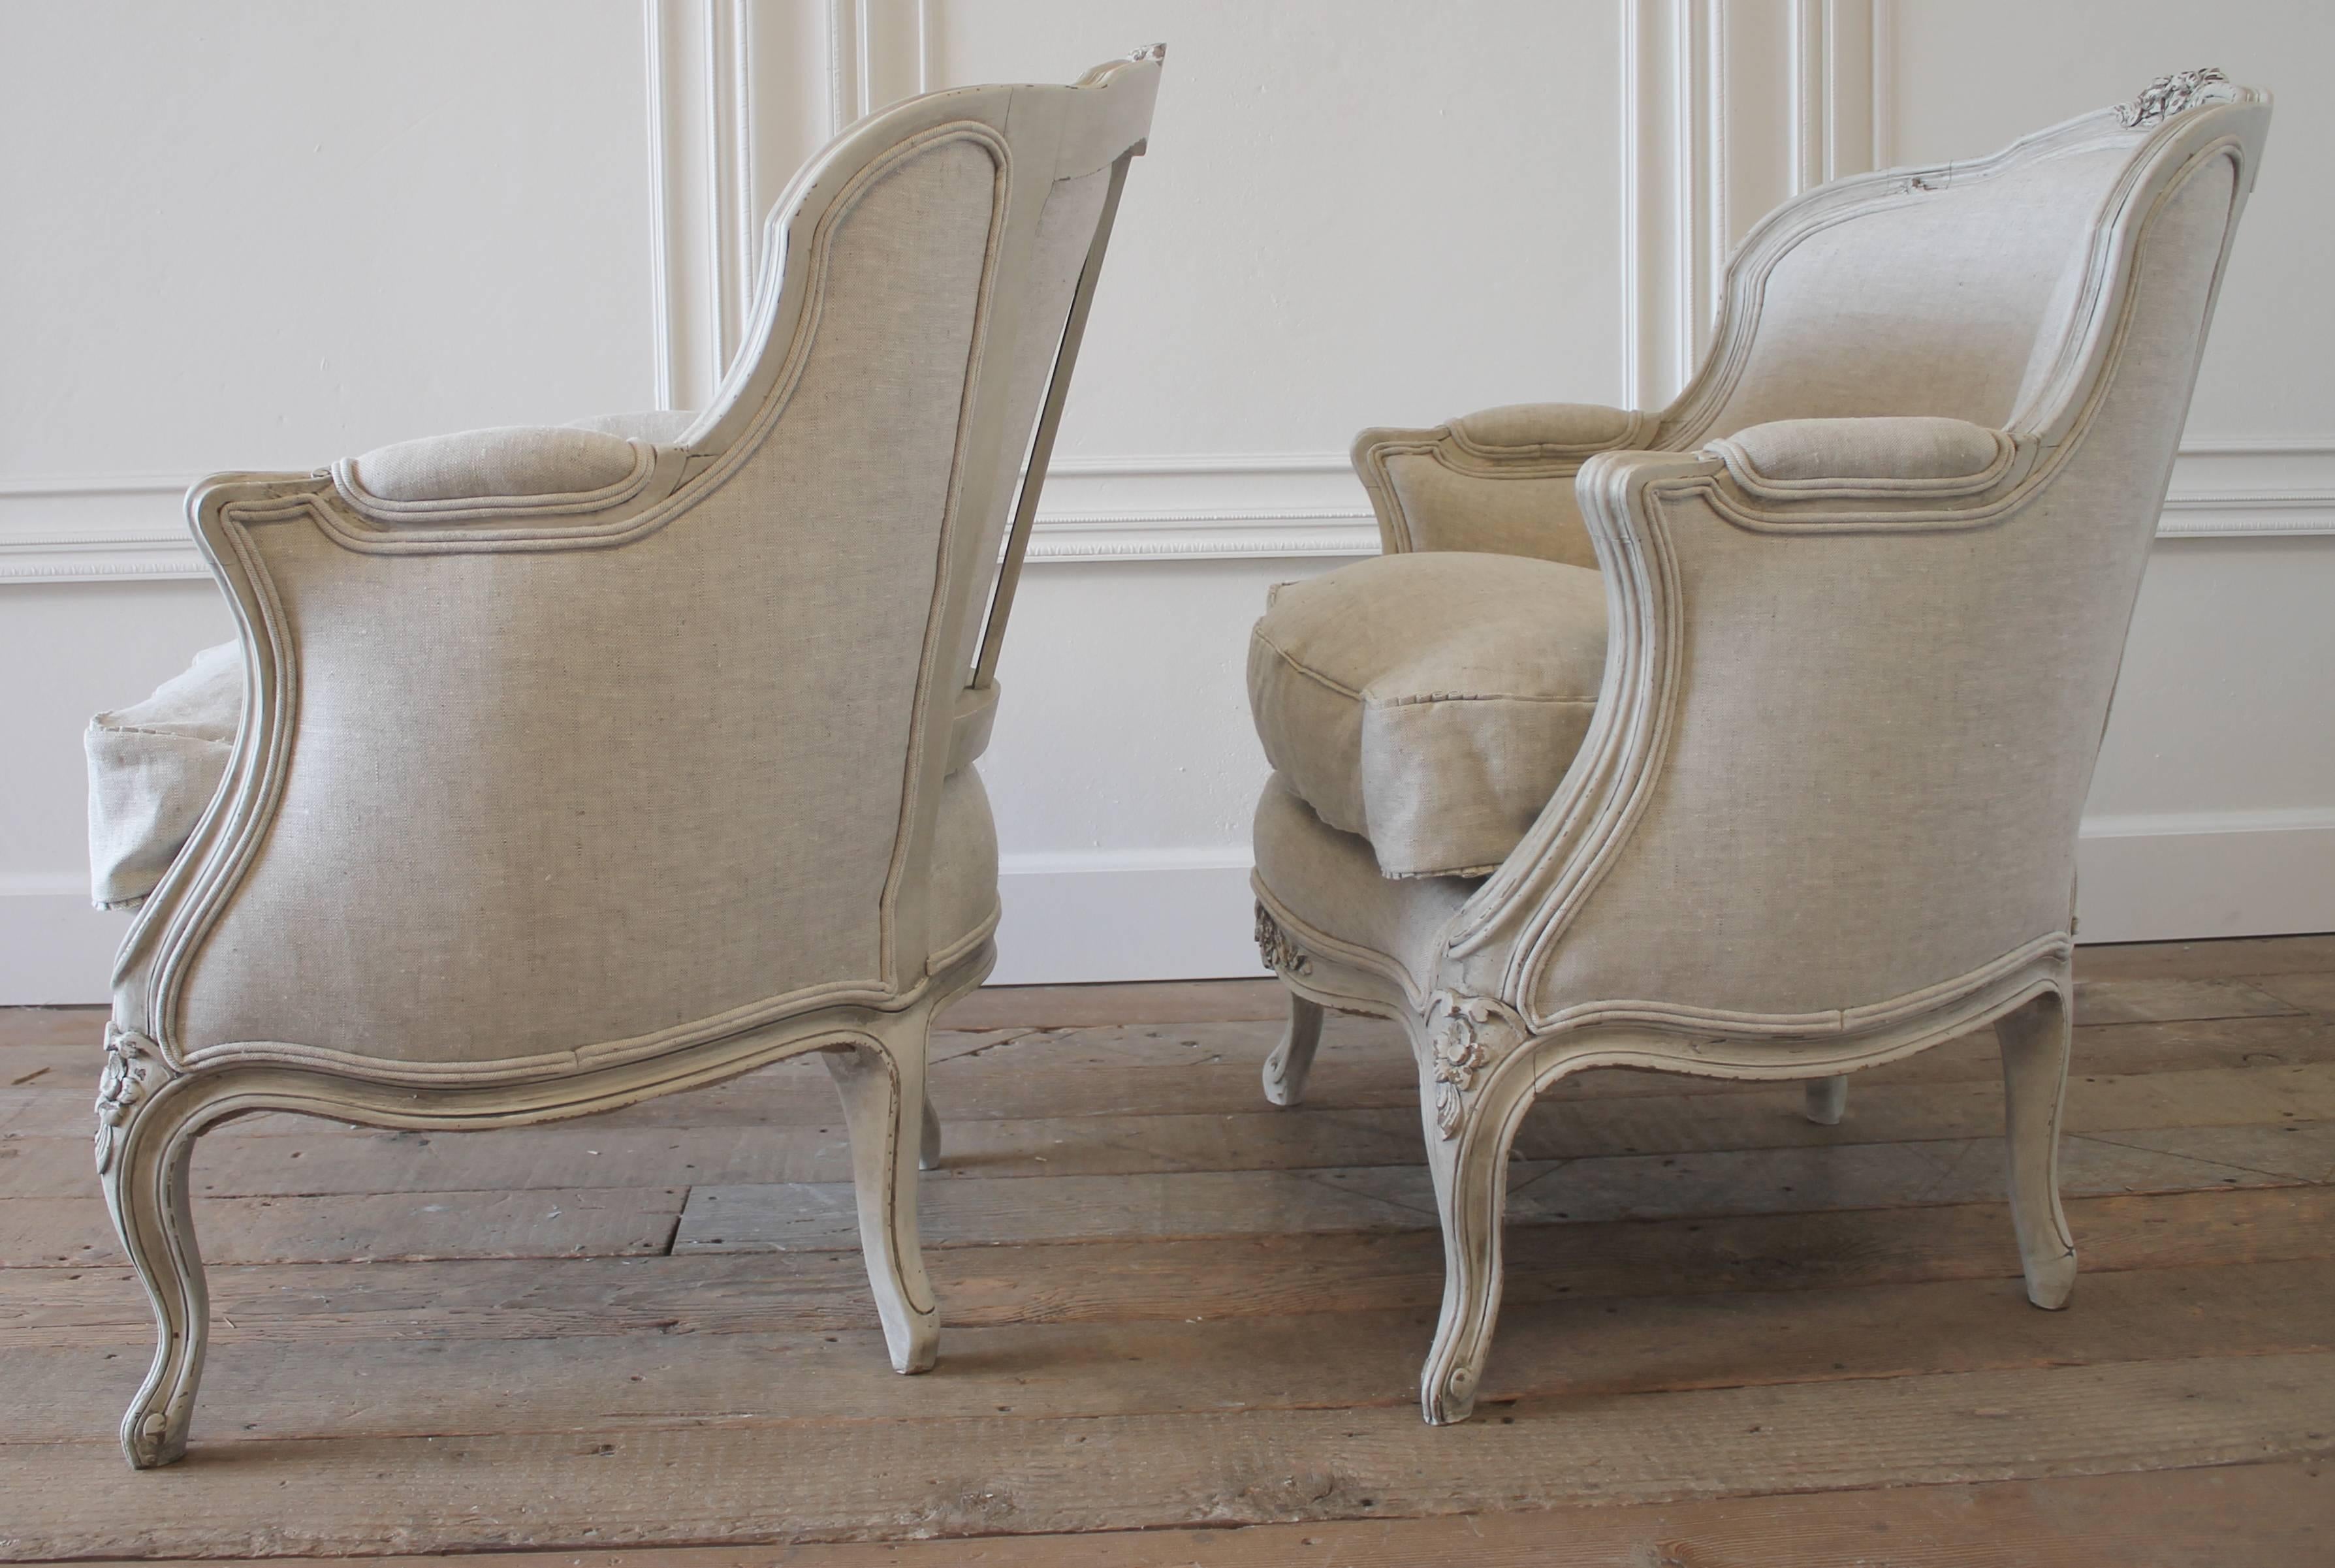 Down Pair of 19th Century Painted Louis XV Style French Bergere Chairs in Linen